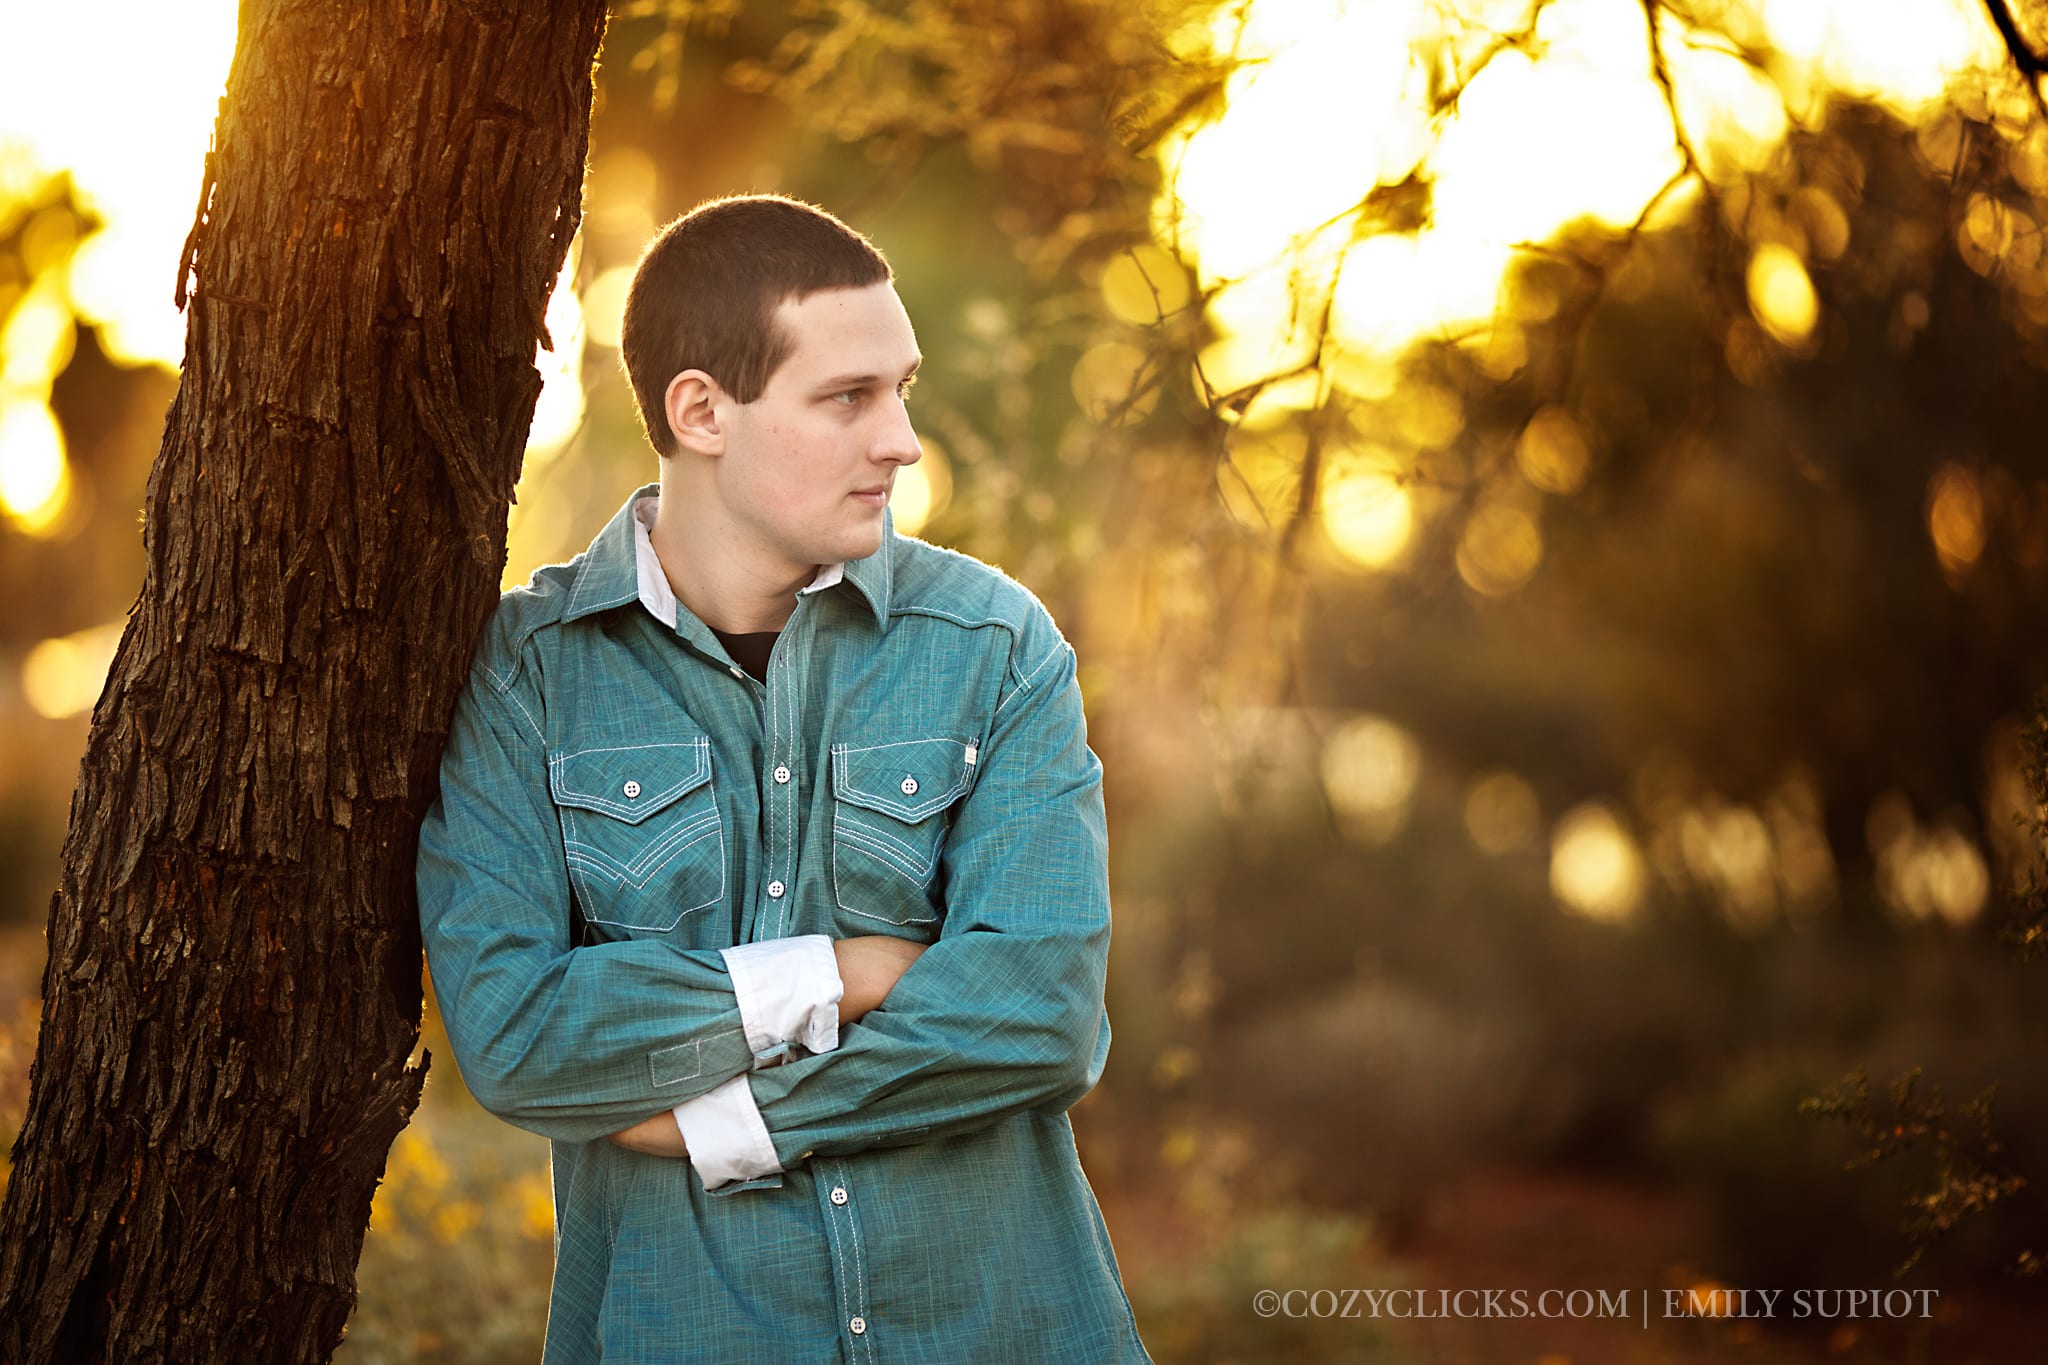 Male high school senior photograph with him looking away into the distance